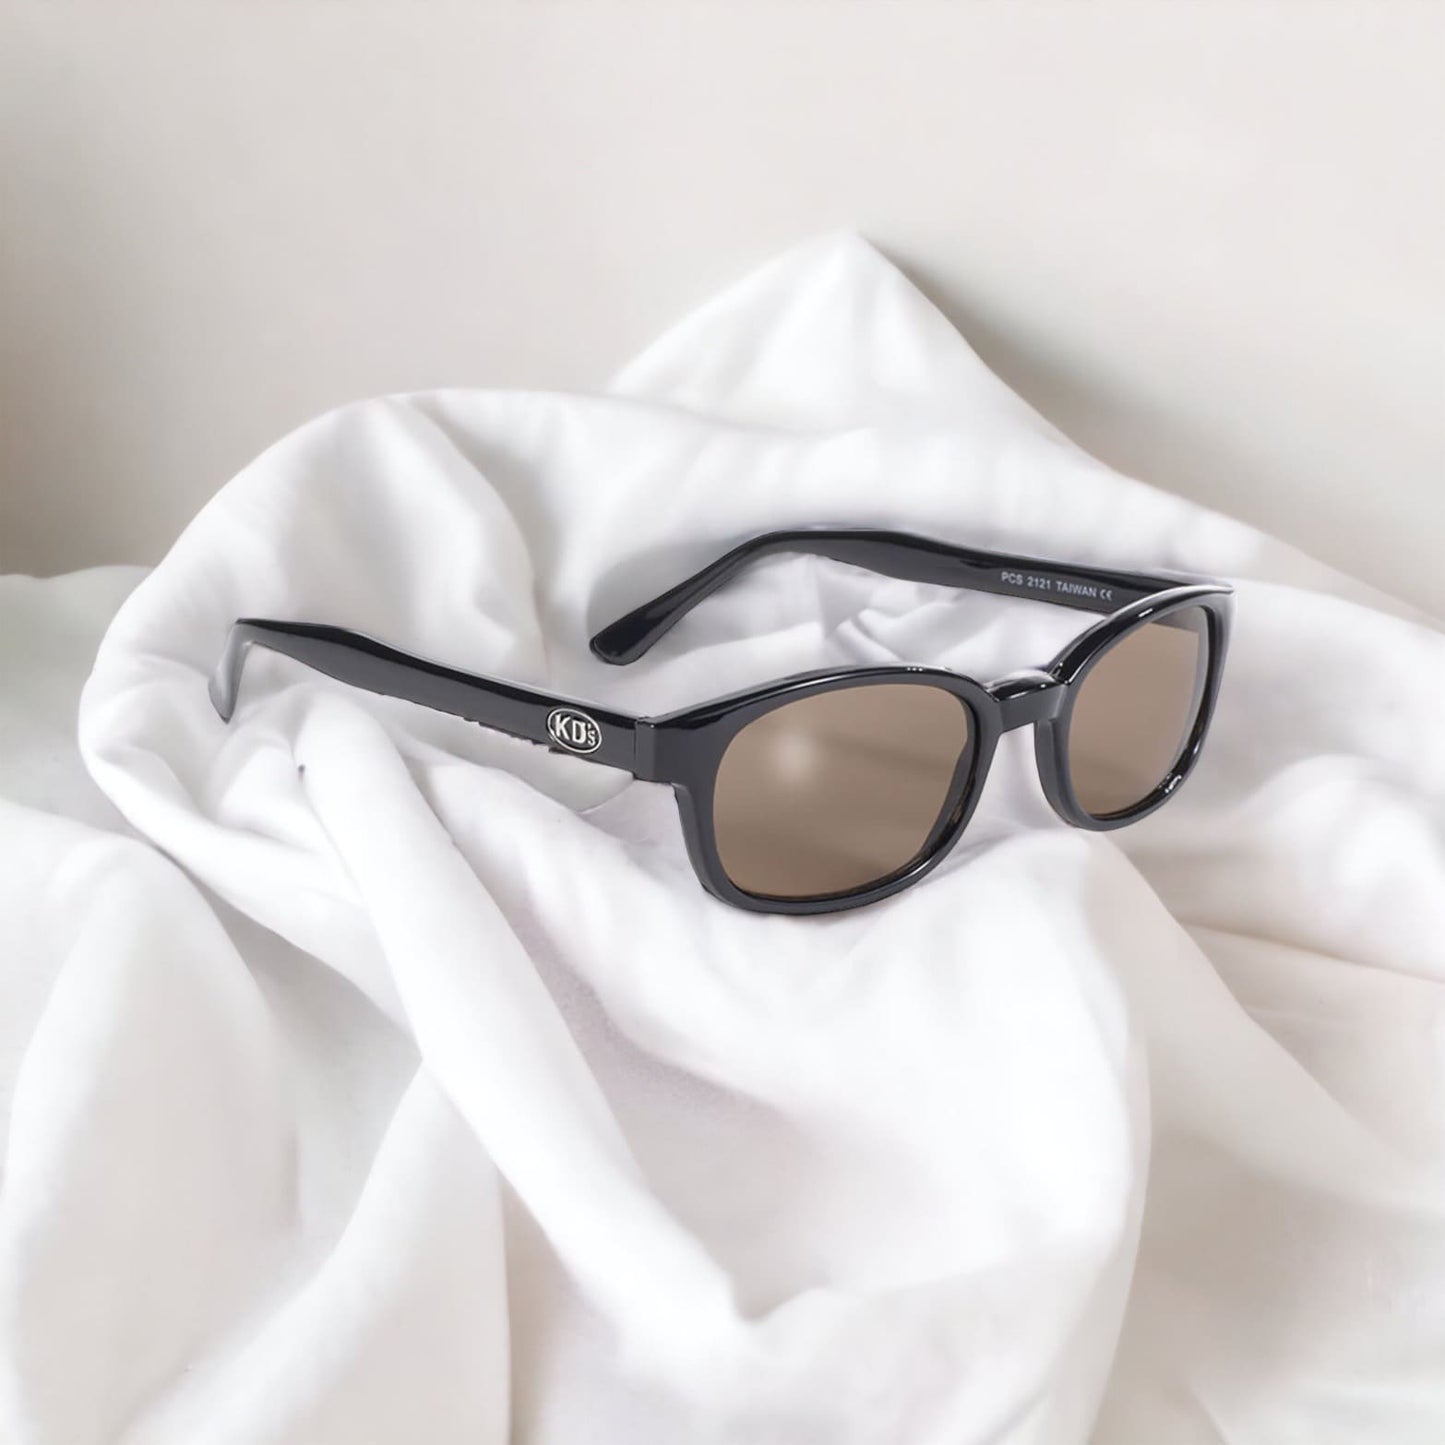 The KD's 2121 sunglasses worn by SAMCRO bikers in the Sons of Anarchy series with brown lenses and a resistant black frame placed on white bed linen.